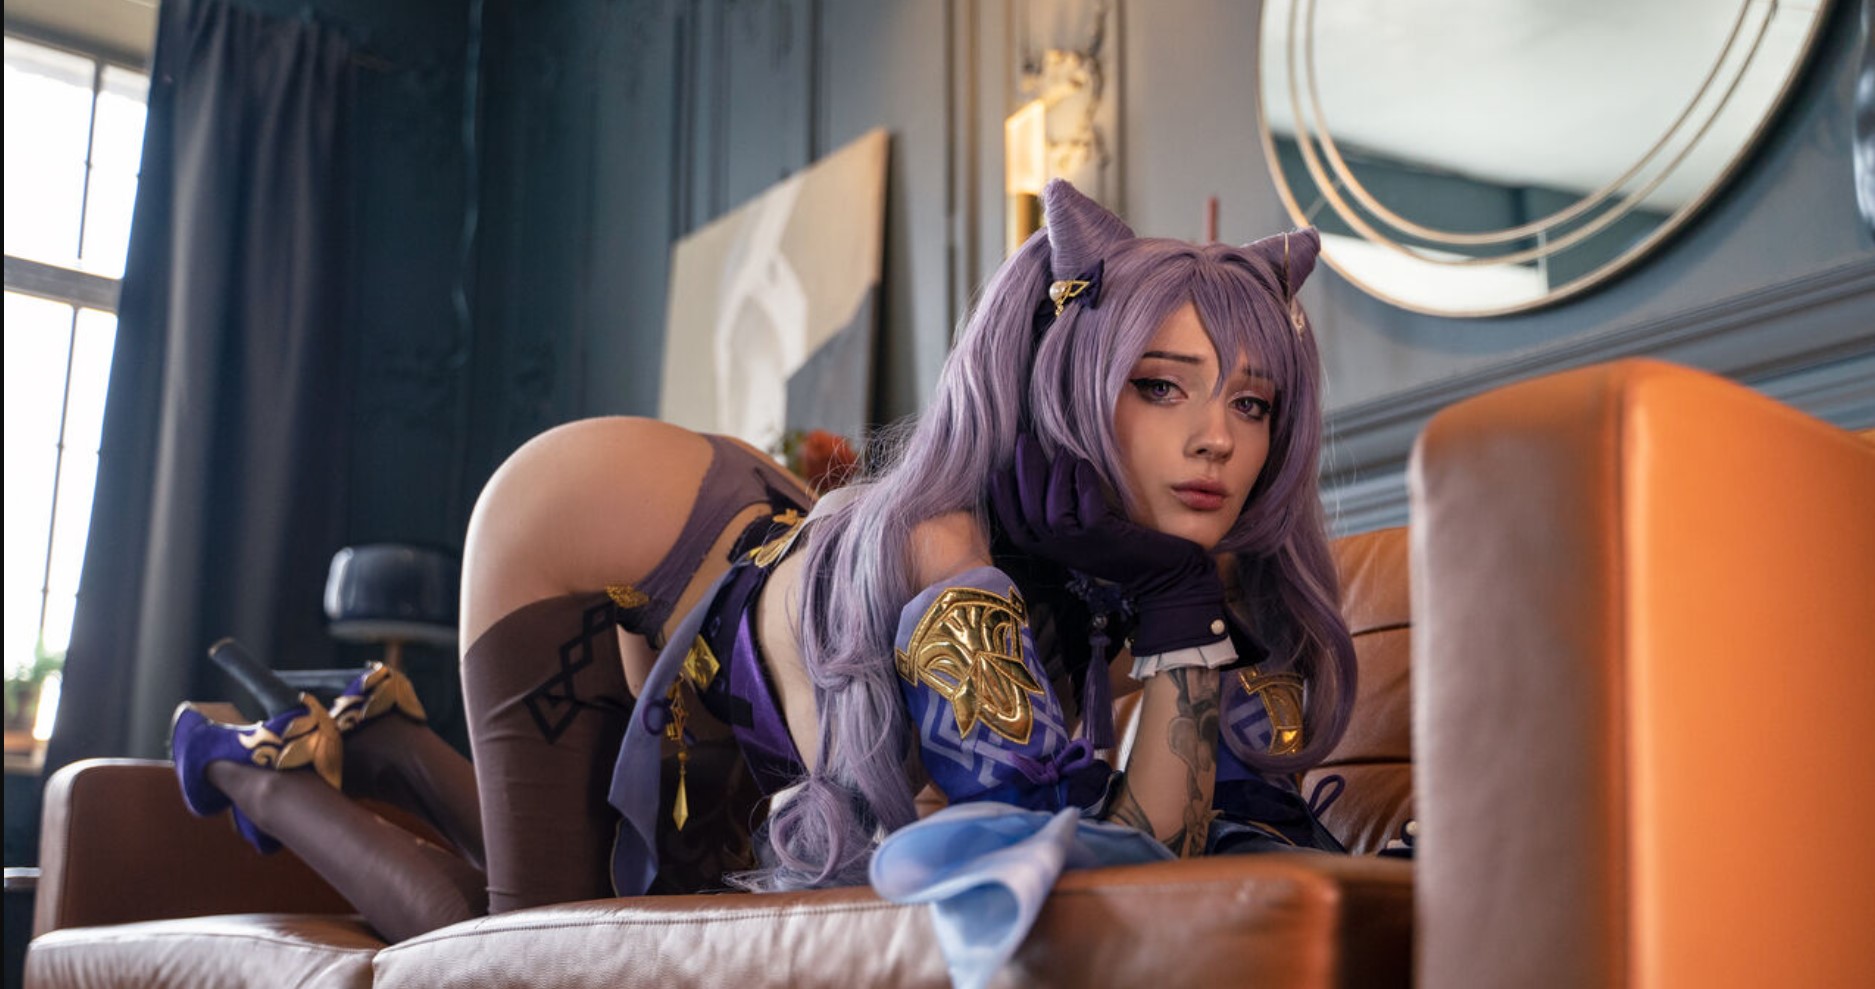 What is Cosplay sex and why is it so popular in the adult industry?